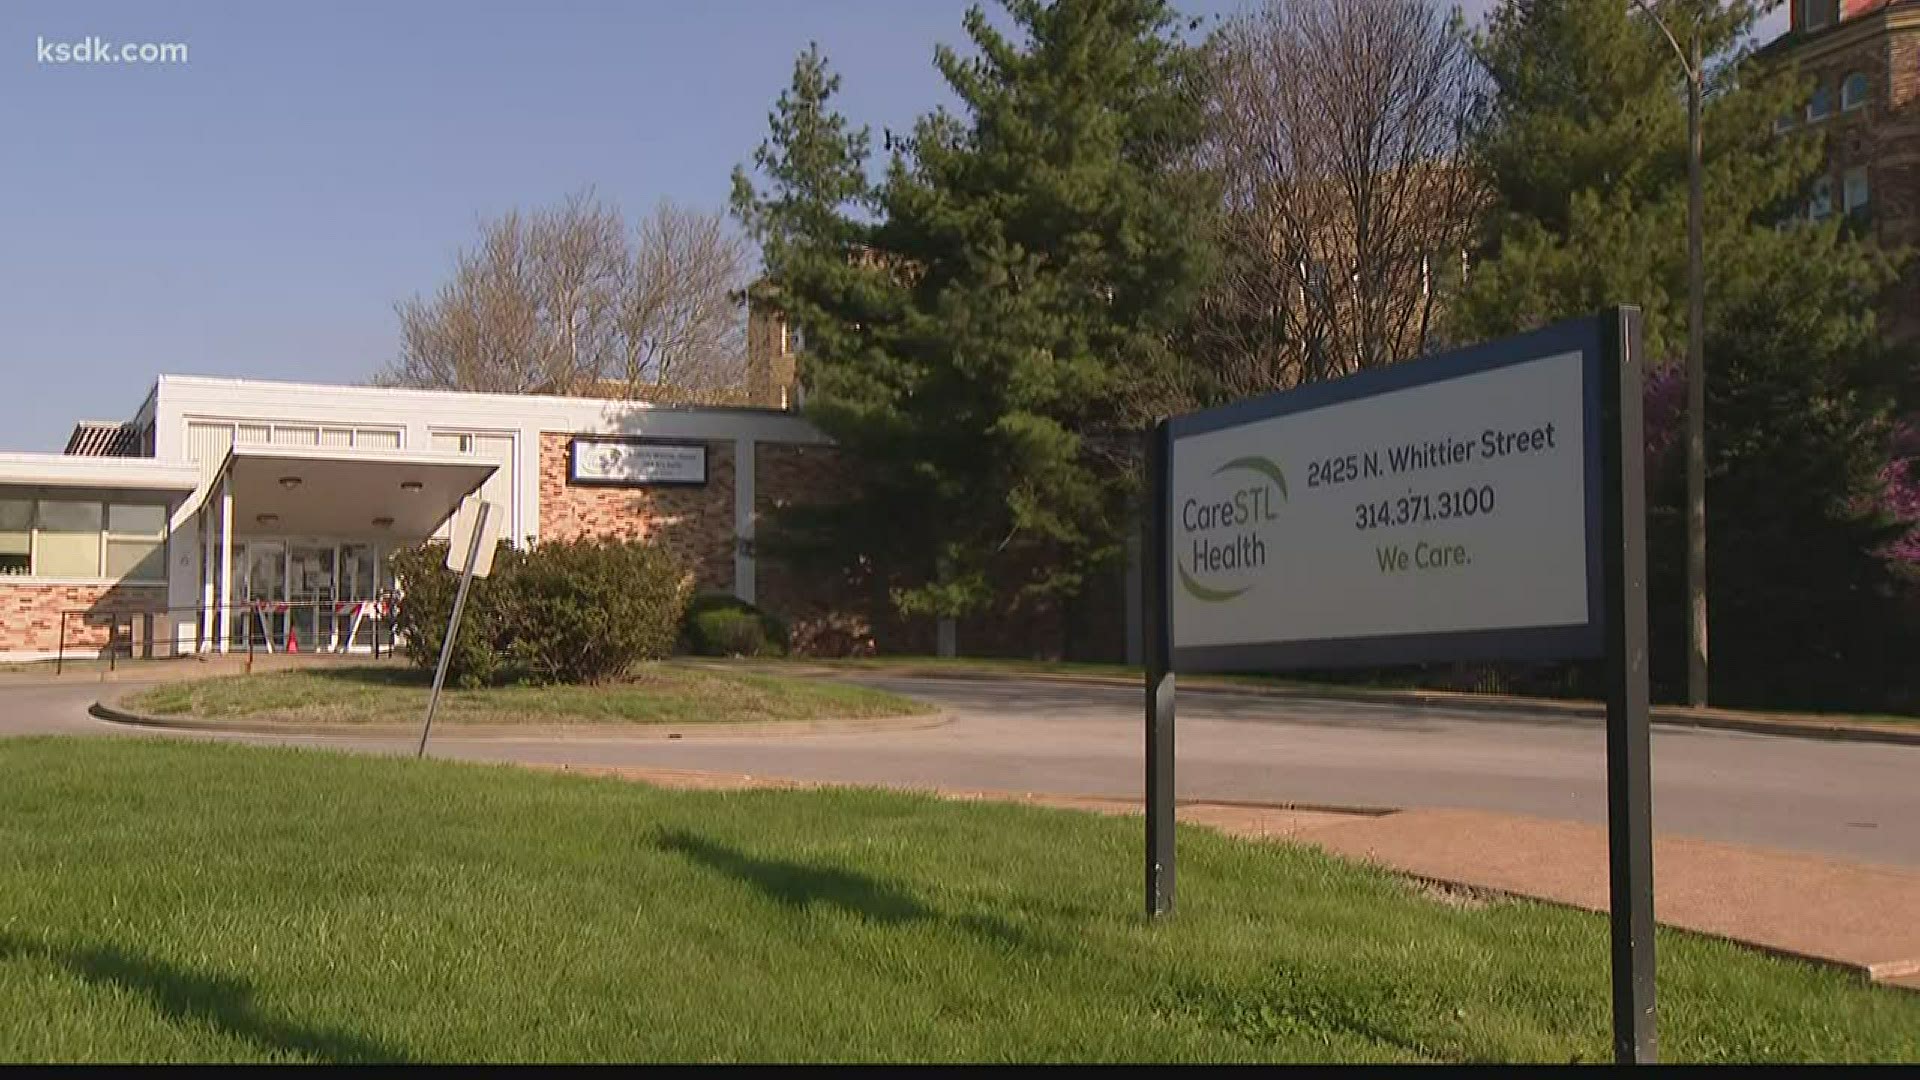 CareSTL Health announced it is suspending service at its Whittier Site after an employee tested positive for COVID-19